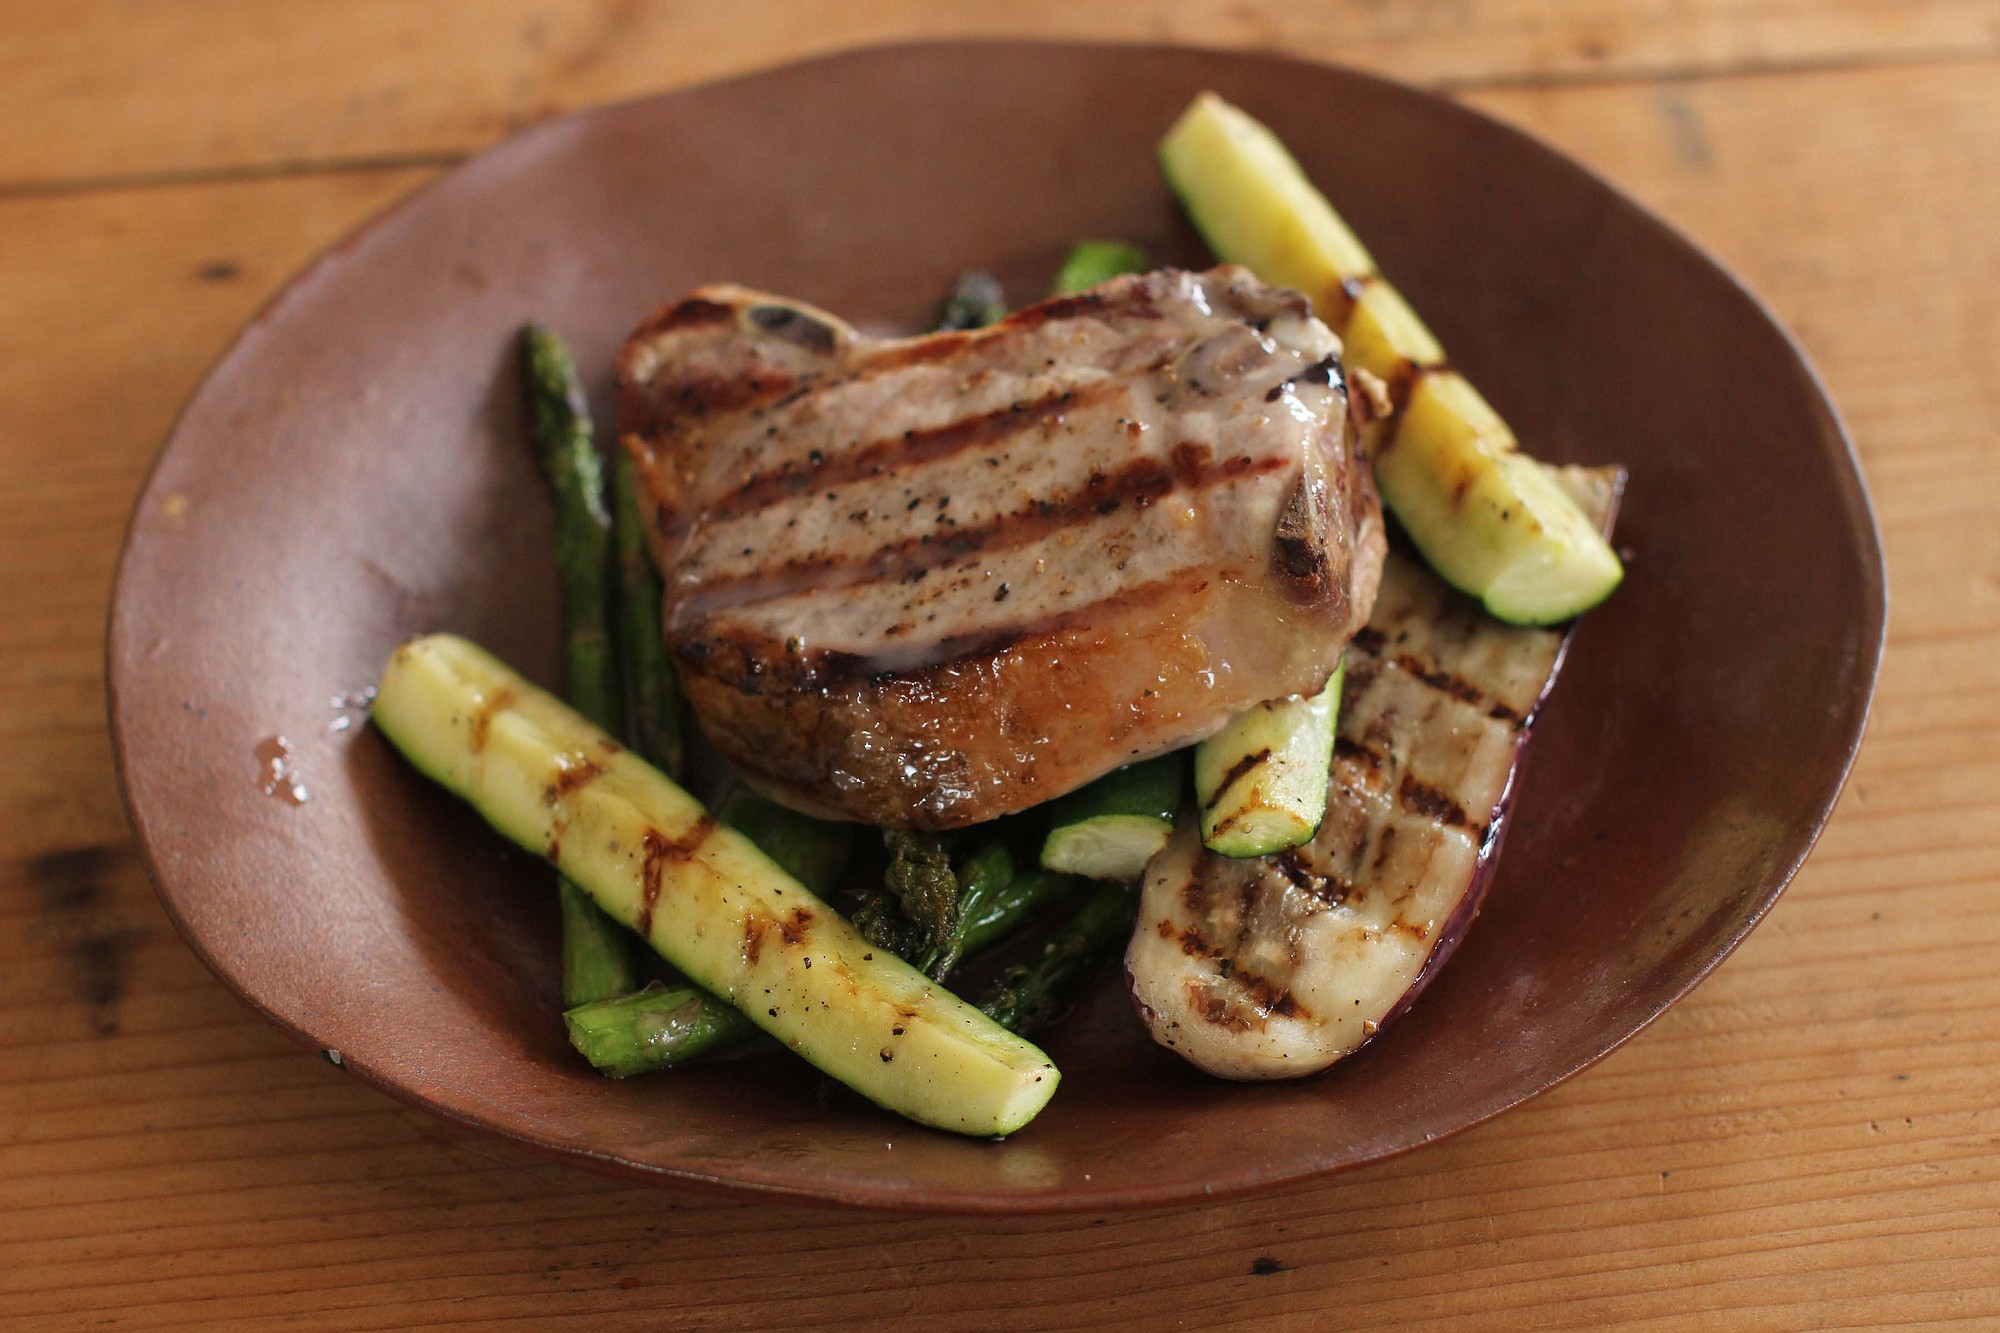 Grilled pork chops and asparagus with lemon truffle viaigrette.